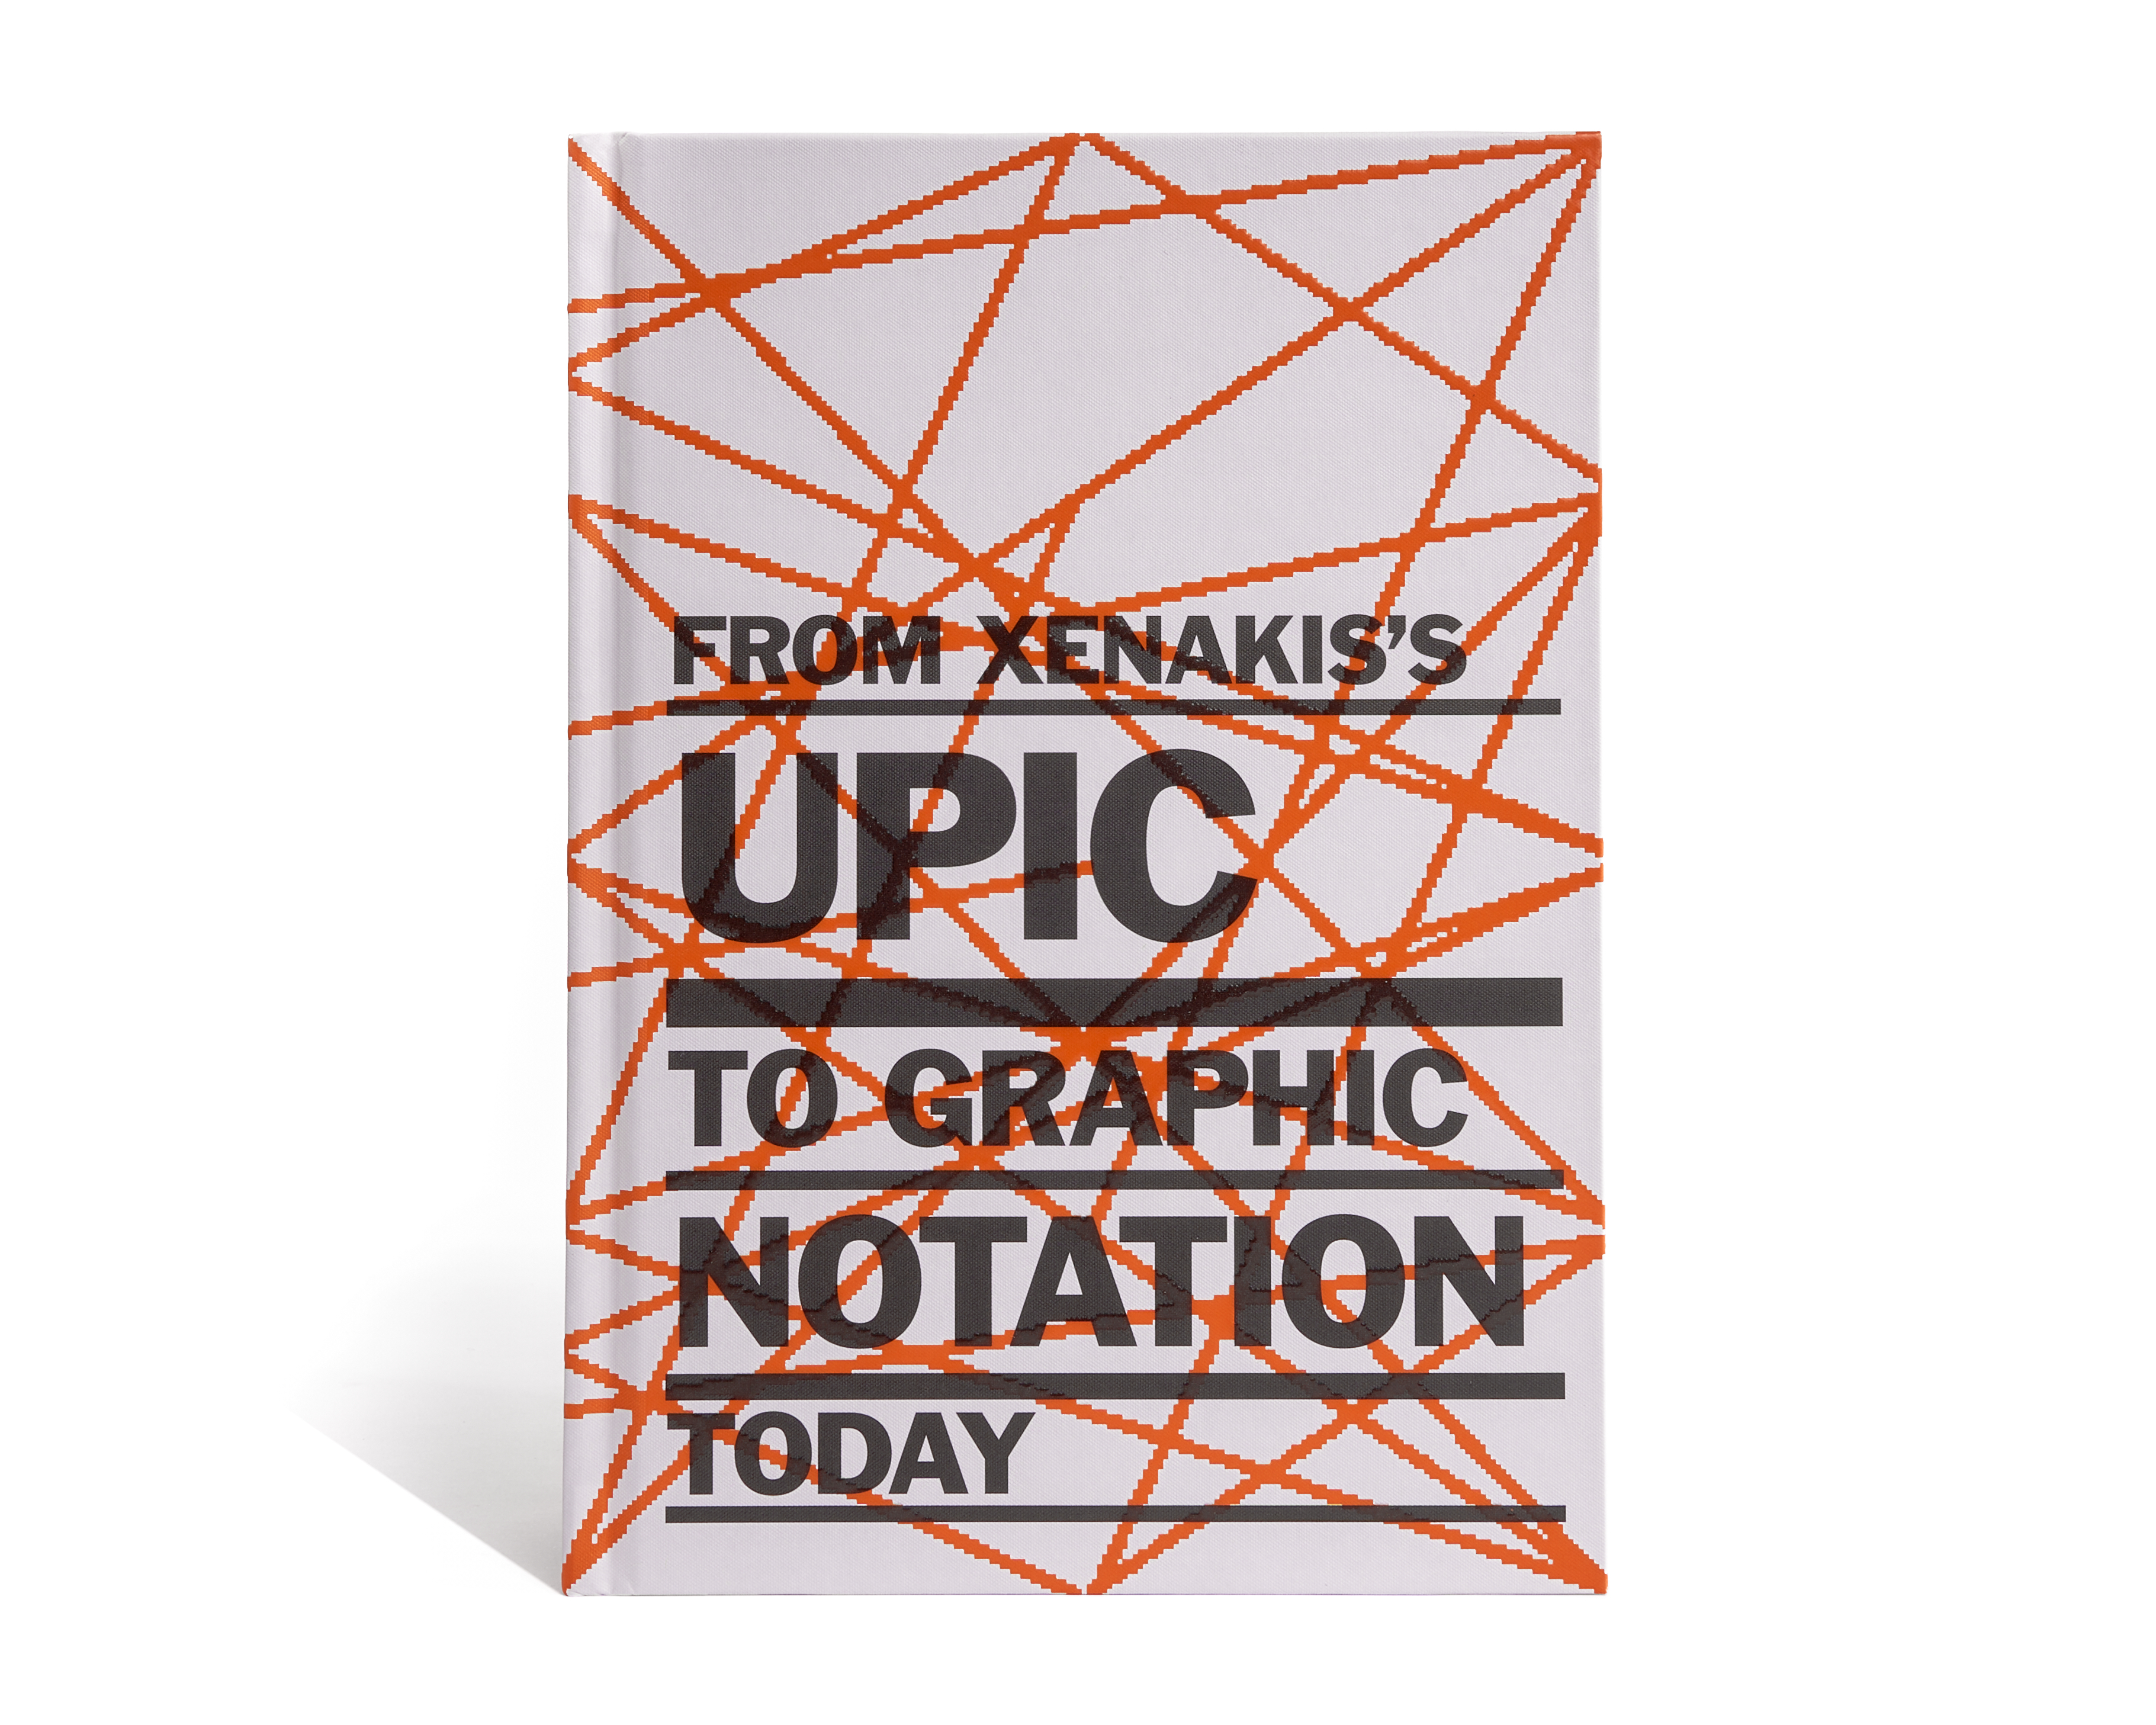 From Xenakis's UPIC to Graphic Notation Today